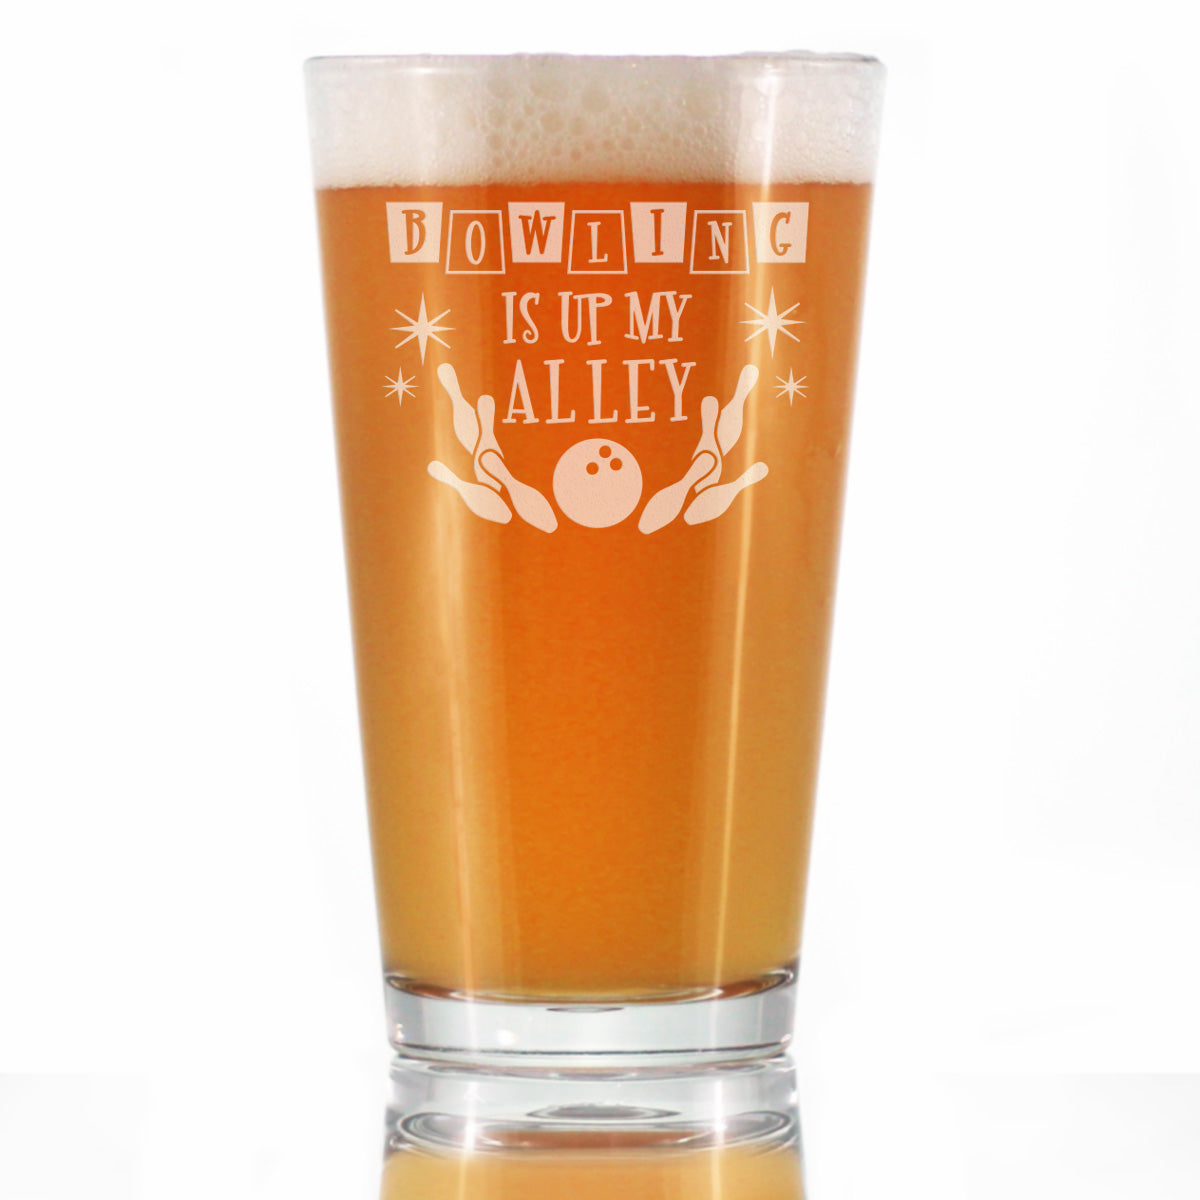 Bowling Is Up My Alley - Pint Glass for Beer - Funny Bowling Themed Gifts and Decor for Bowlers - 16 oz Glass